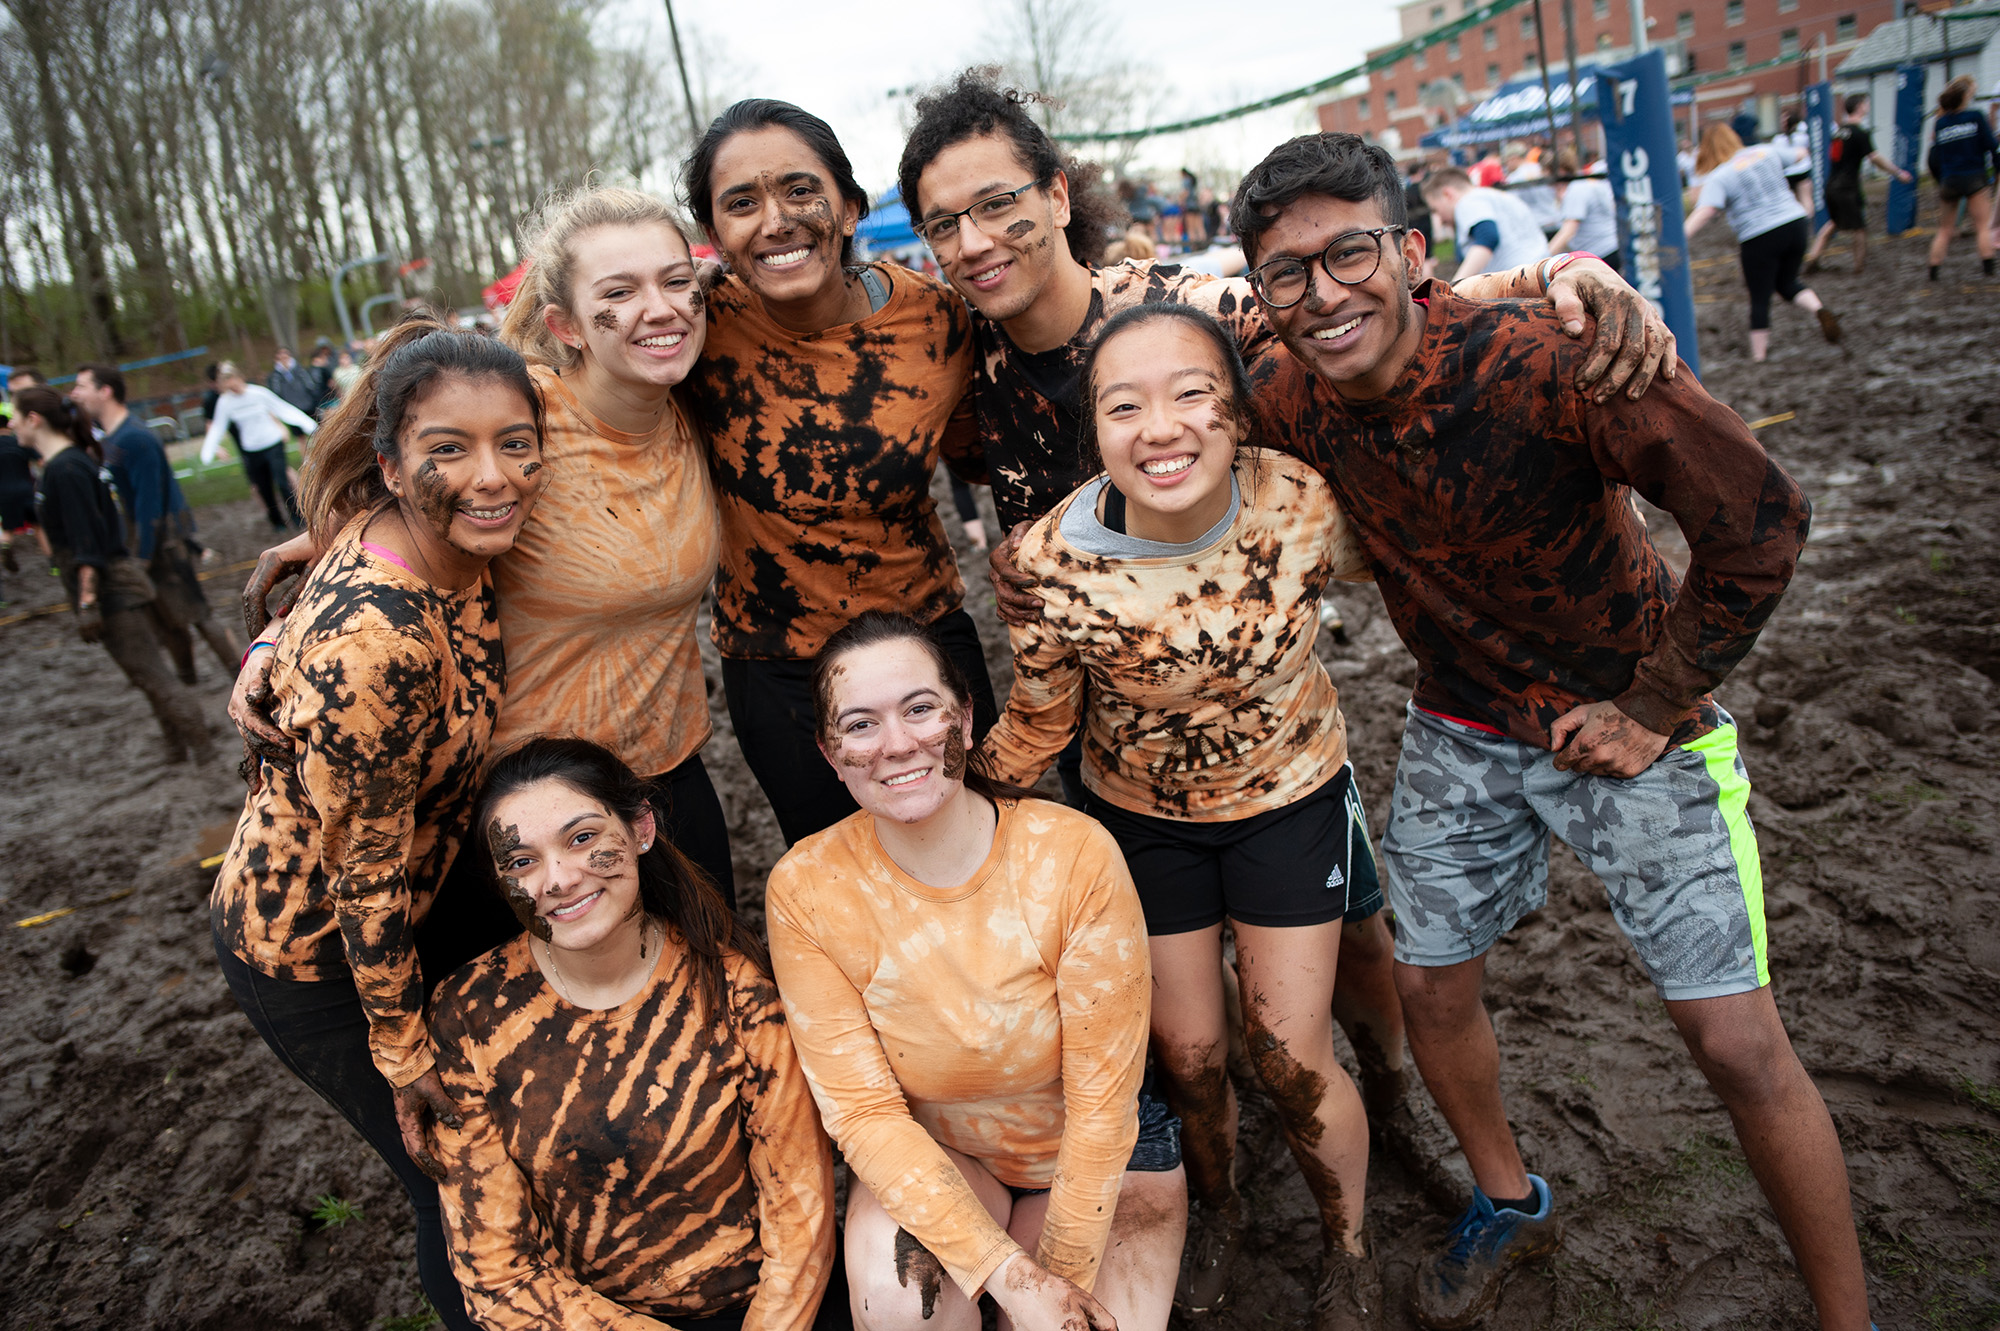 Students in orange pose during oozeball tournament